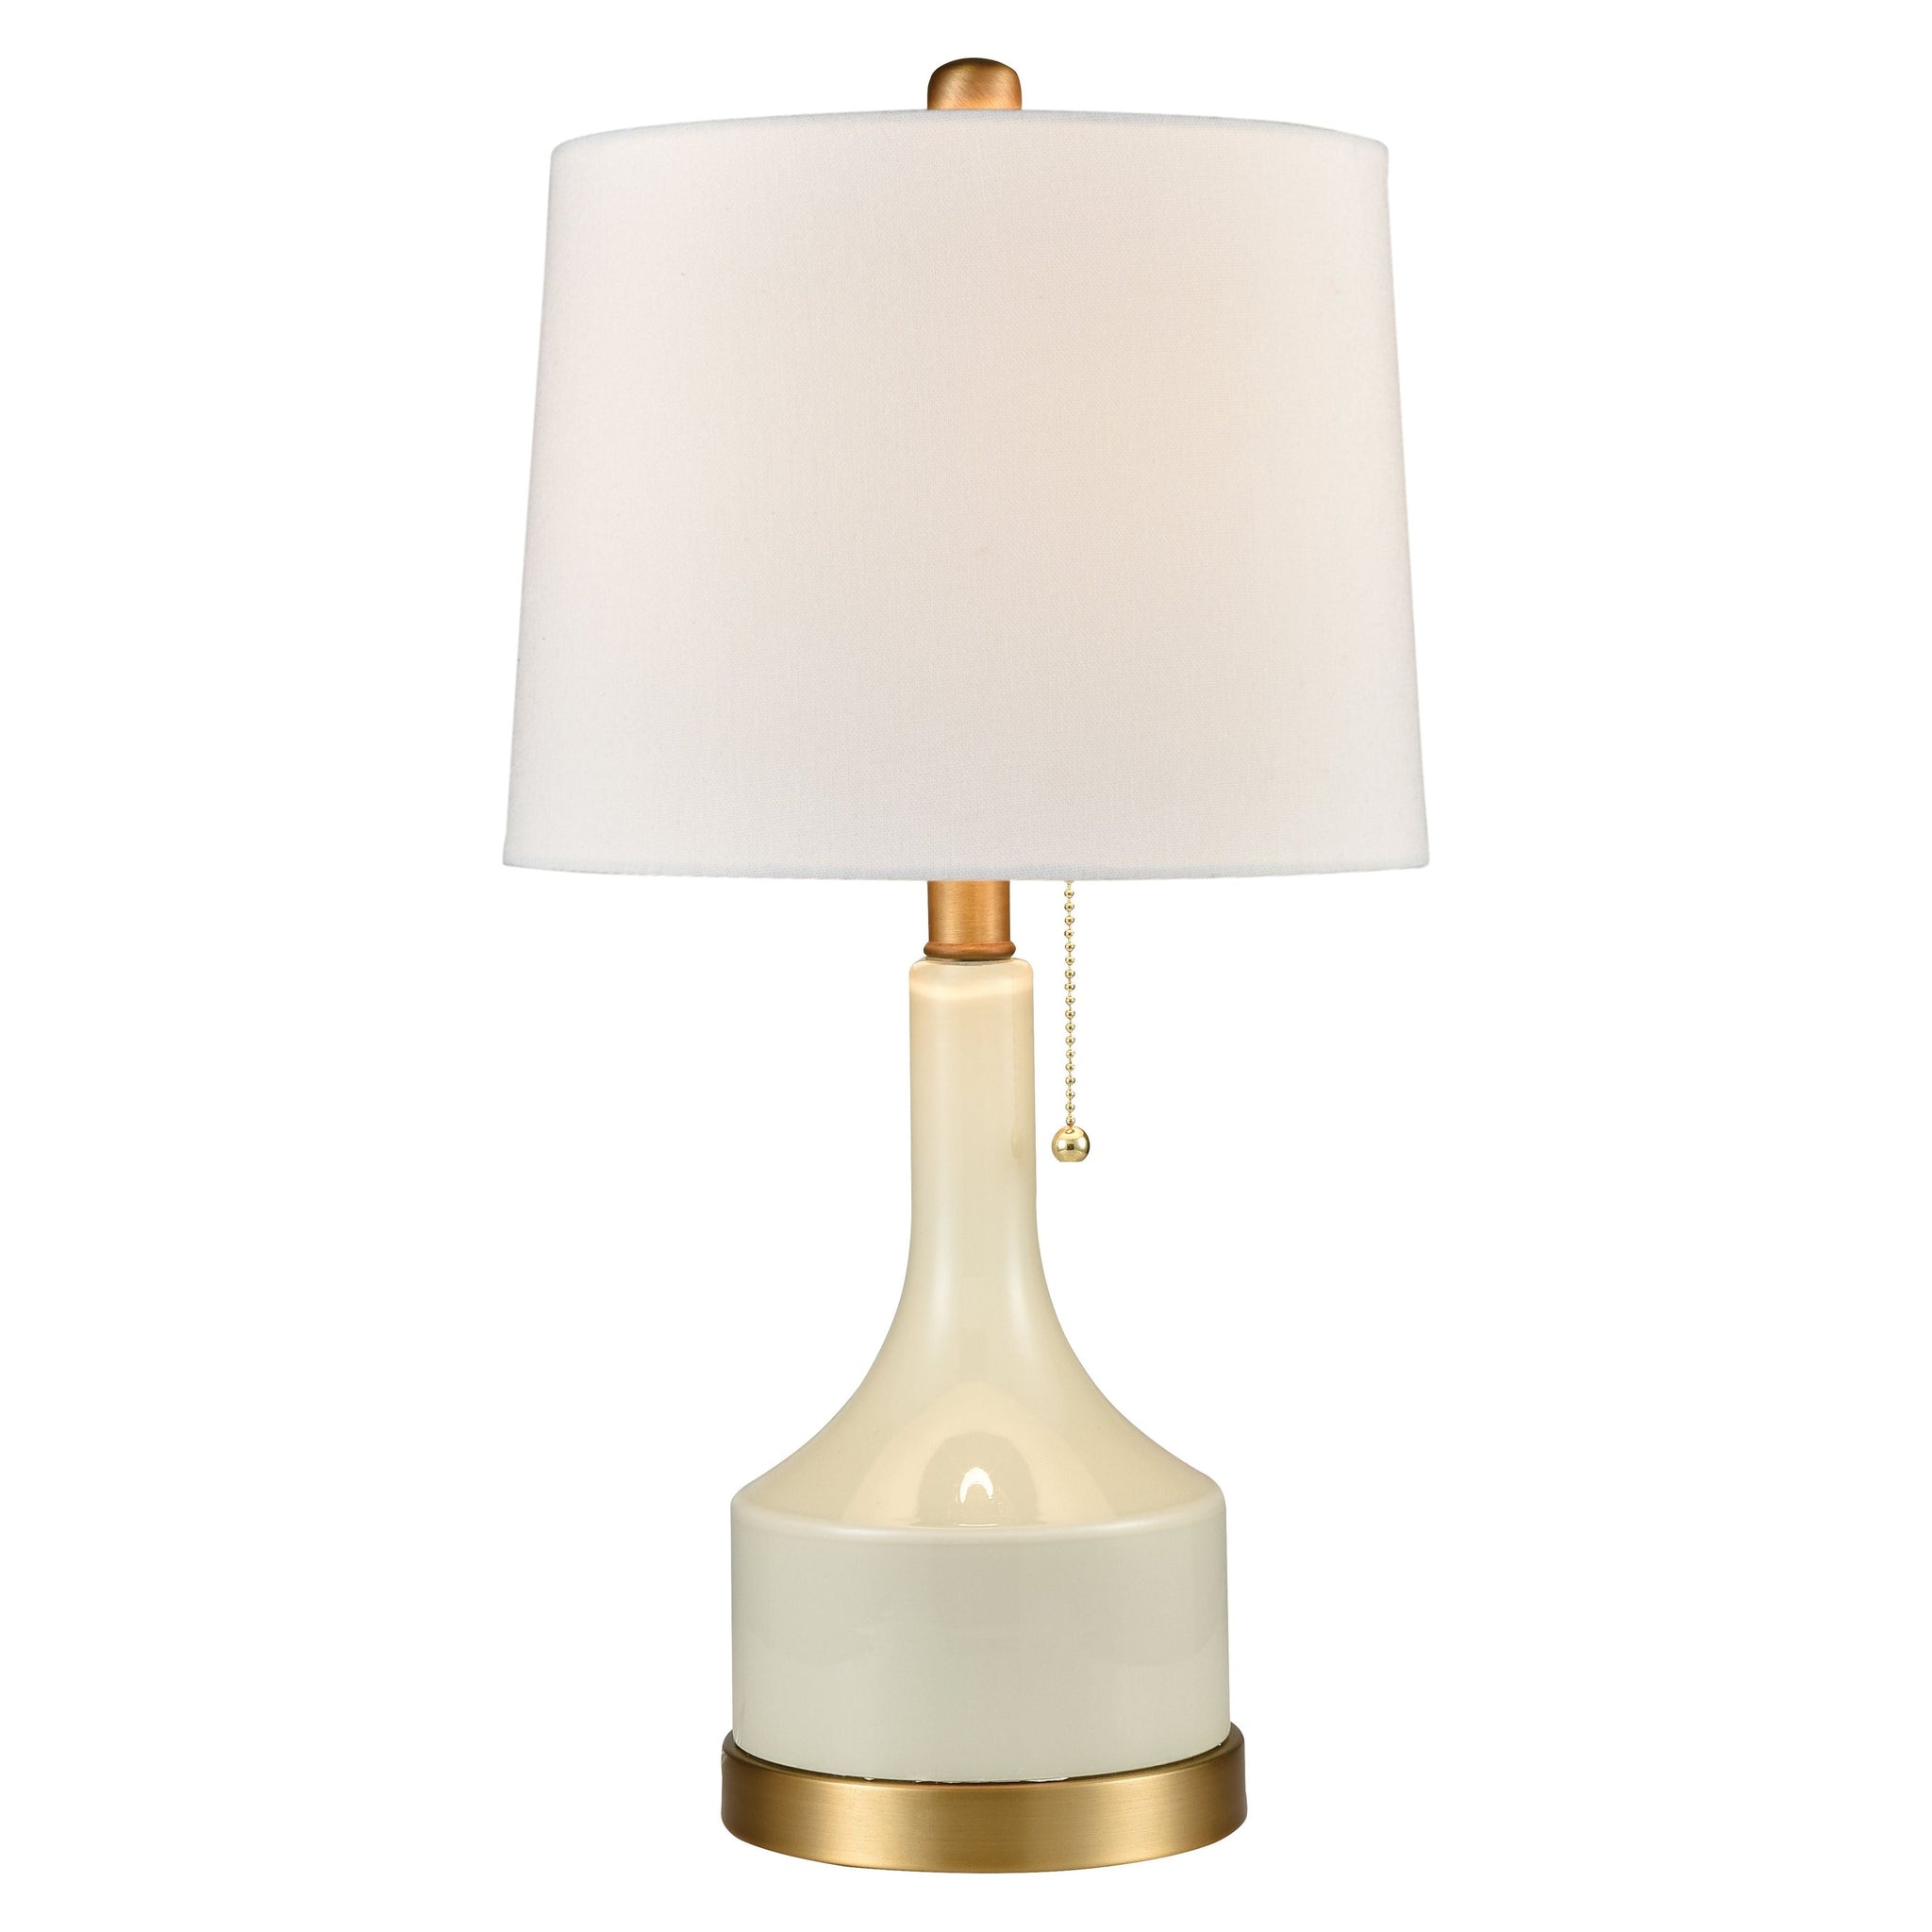 Small But Strong 21" High 1-Light Table Lamp